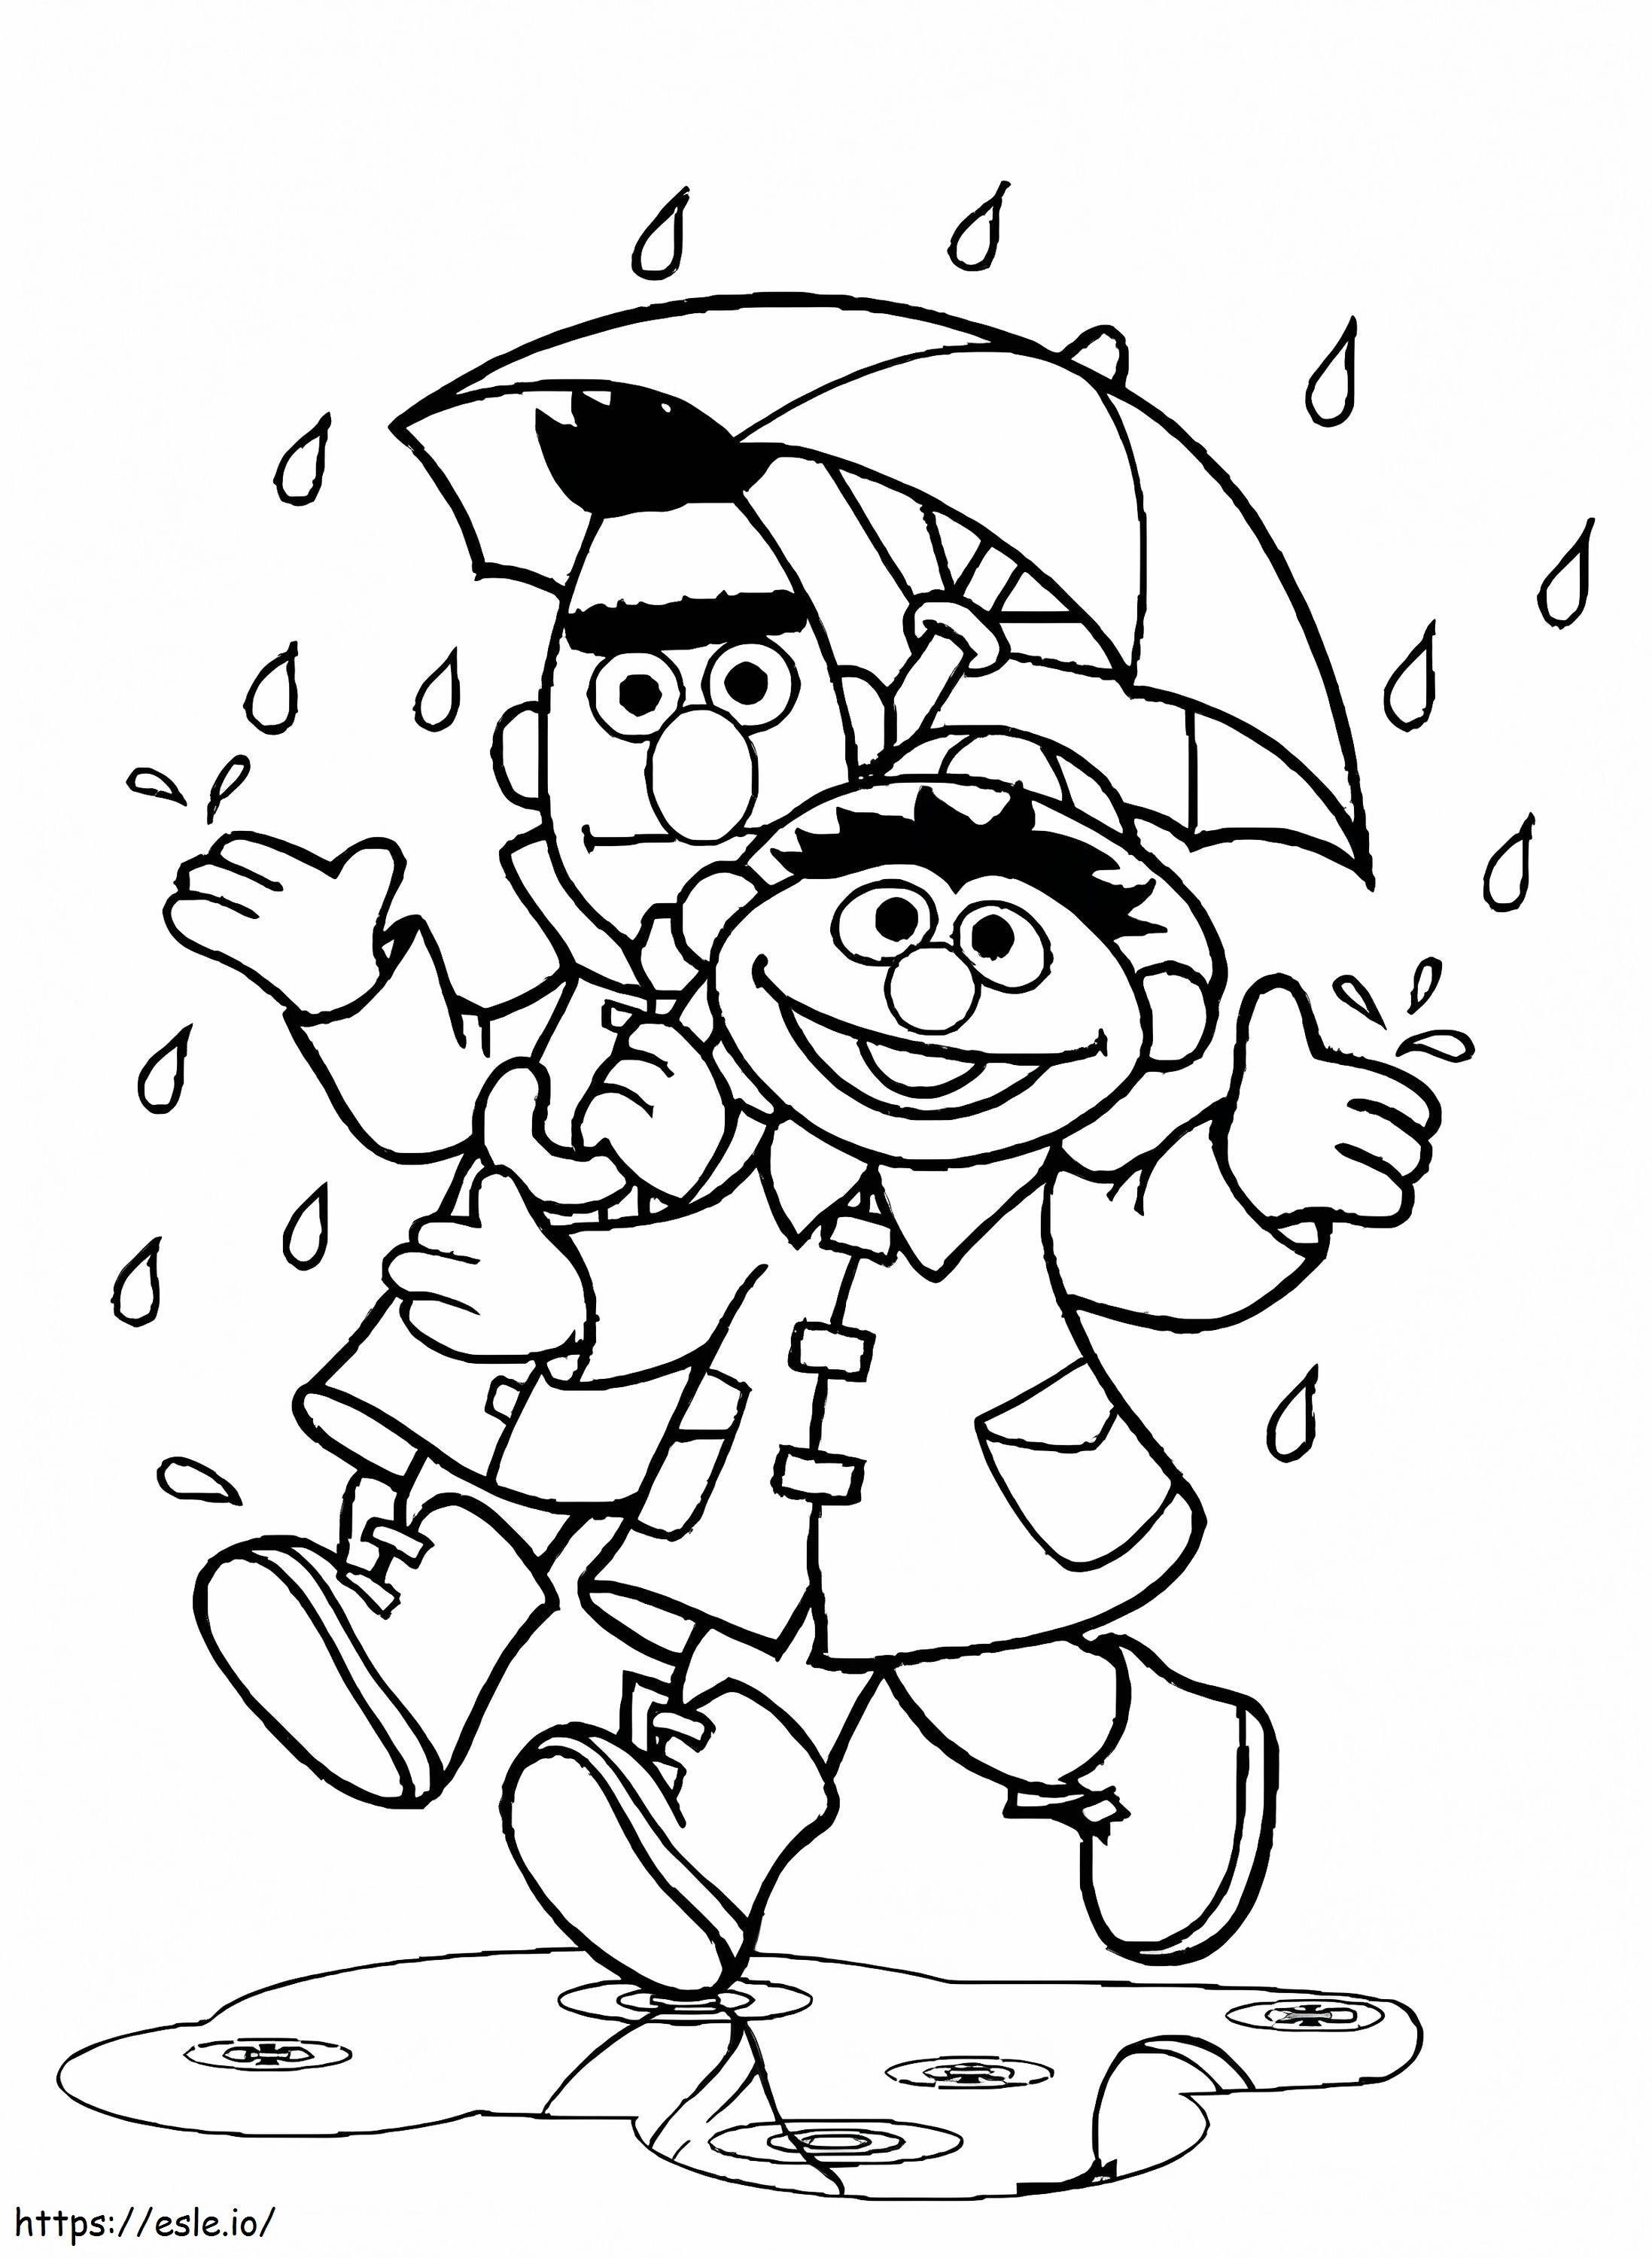 Bert And Ernie Rain Coloring Page  coloring page